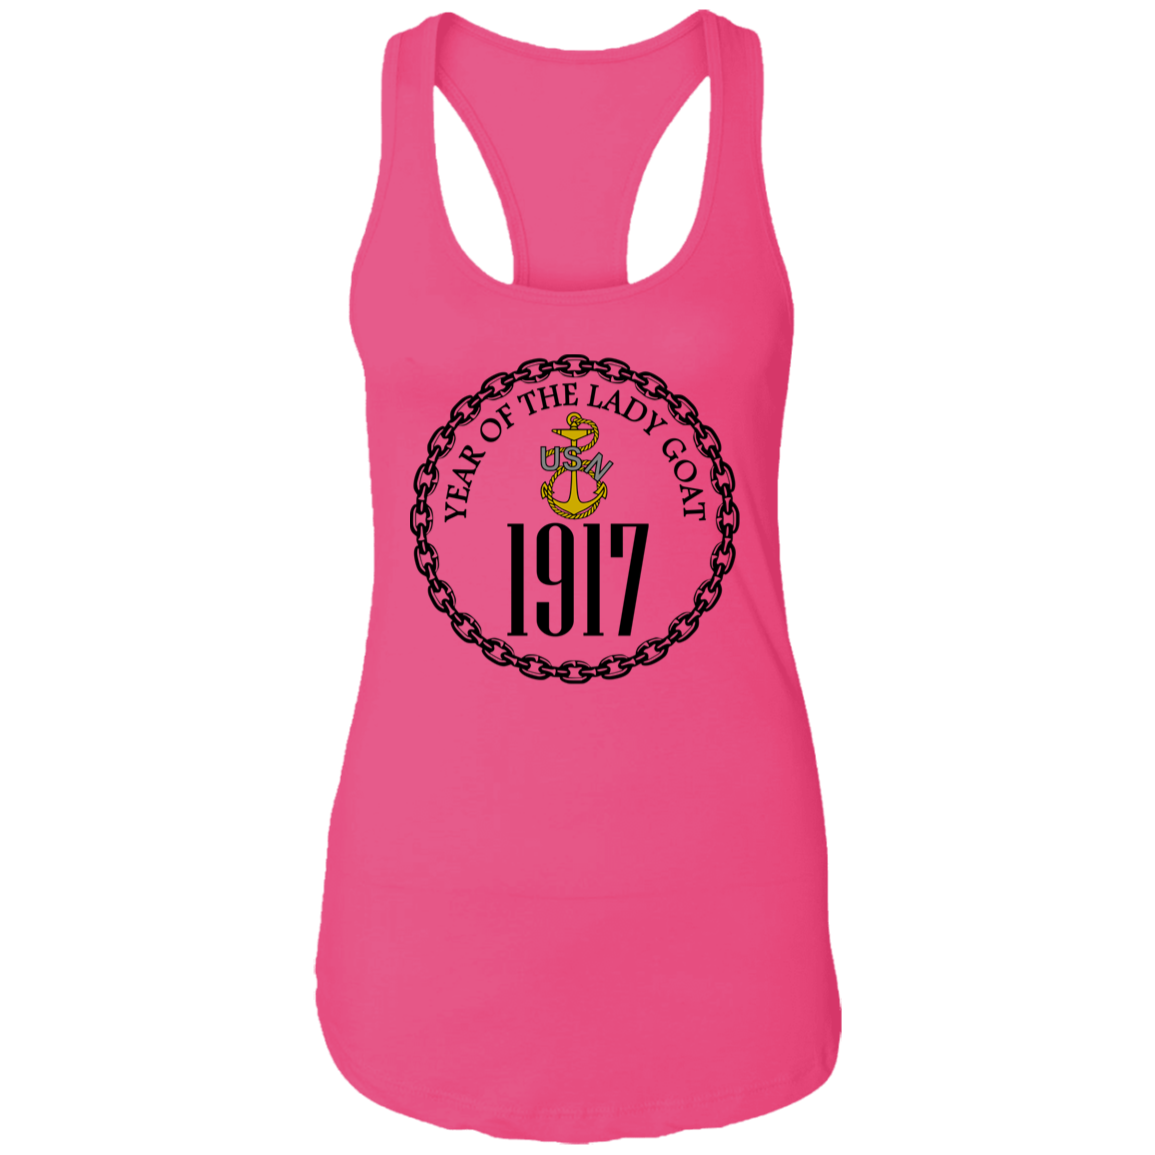 Year of the Lady Goat Ladies Racerback Tank